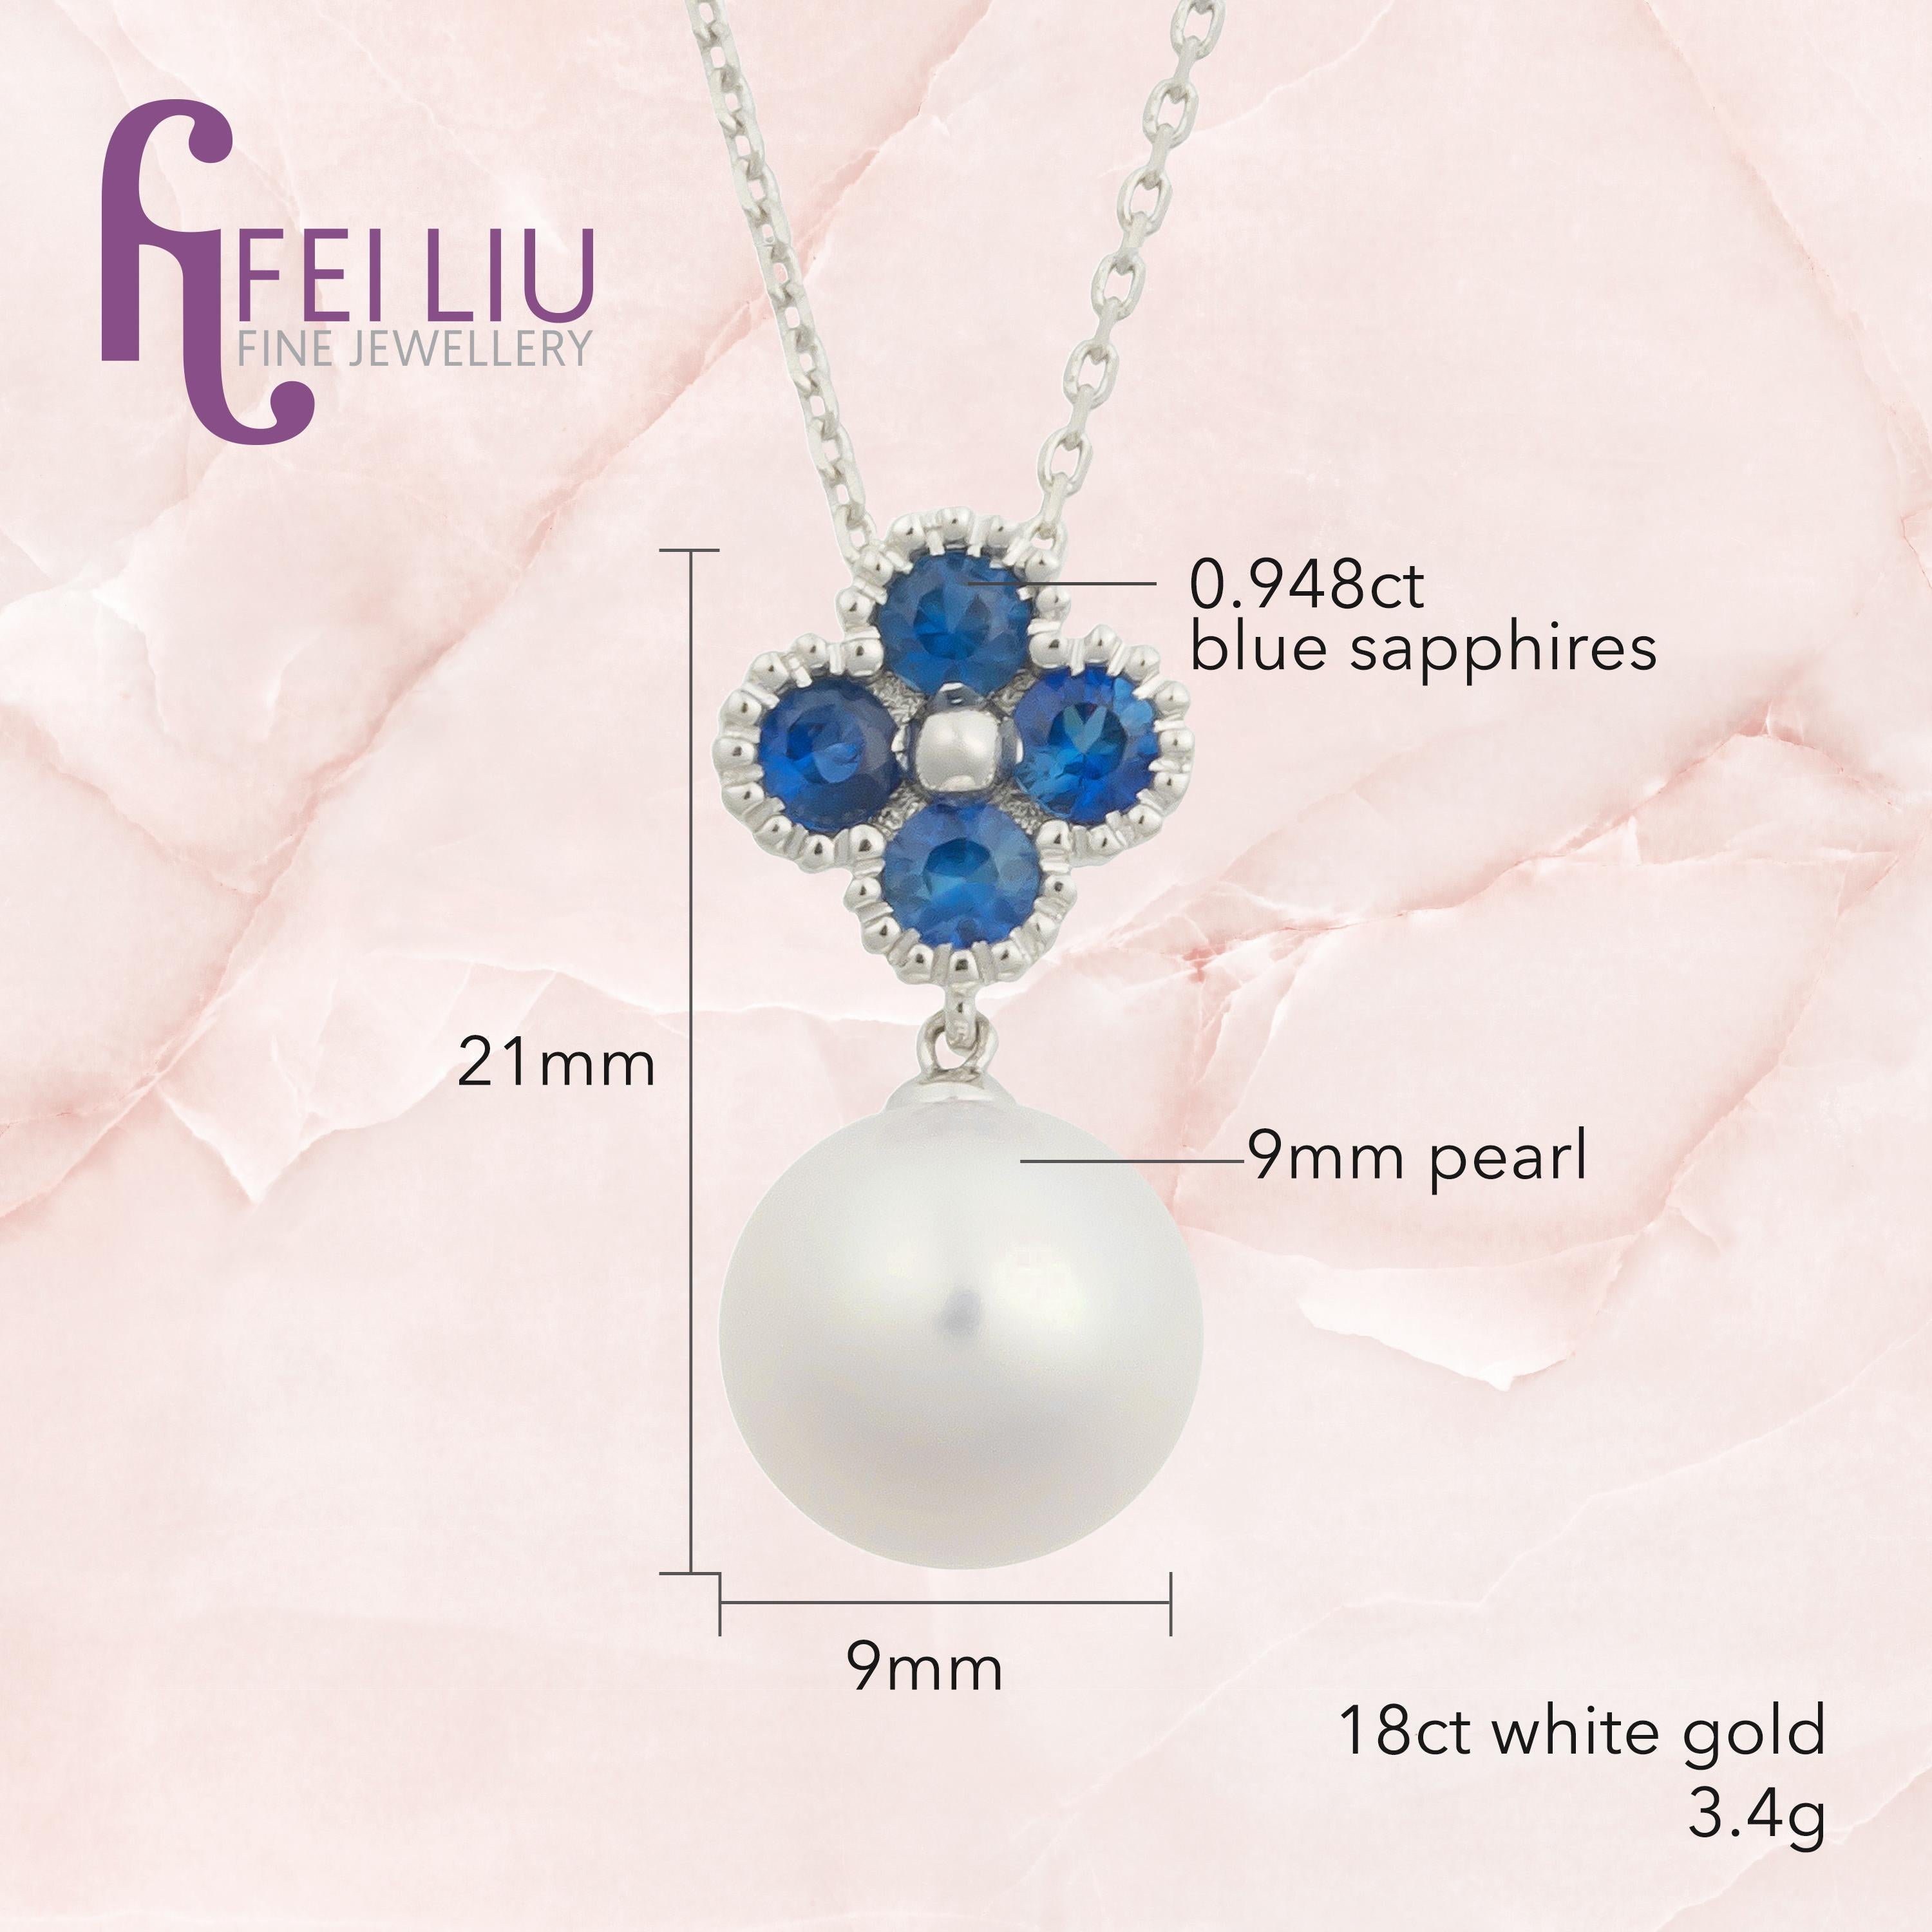 Contemporary Fei Liu Blue Sapphire Pearl White Gold Necklace Earring Set